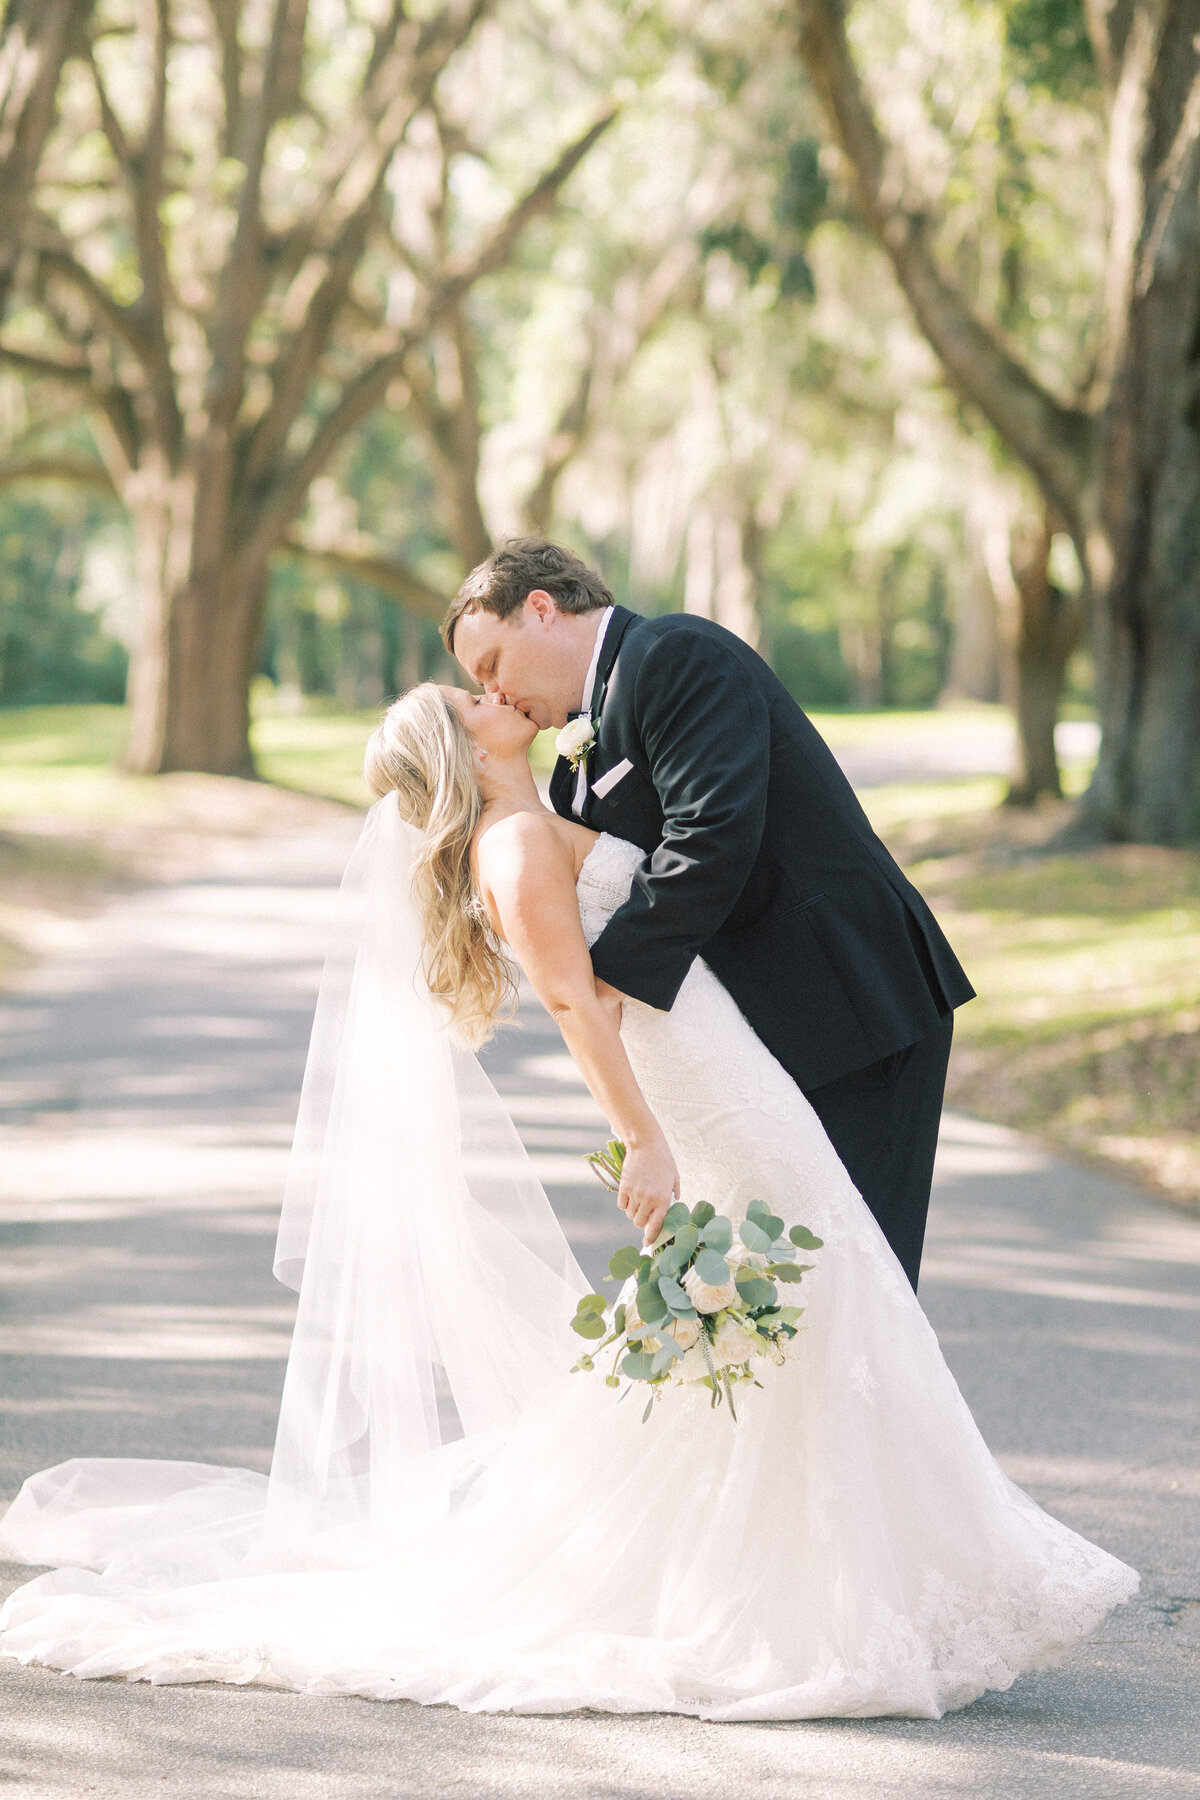 A wedding at Pebble Hill in Thomasville GA - 22